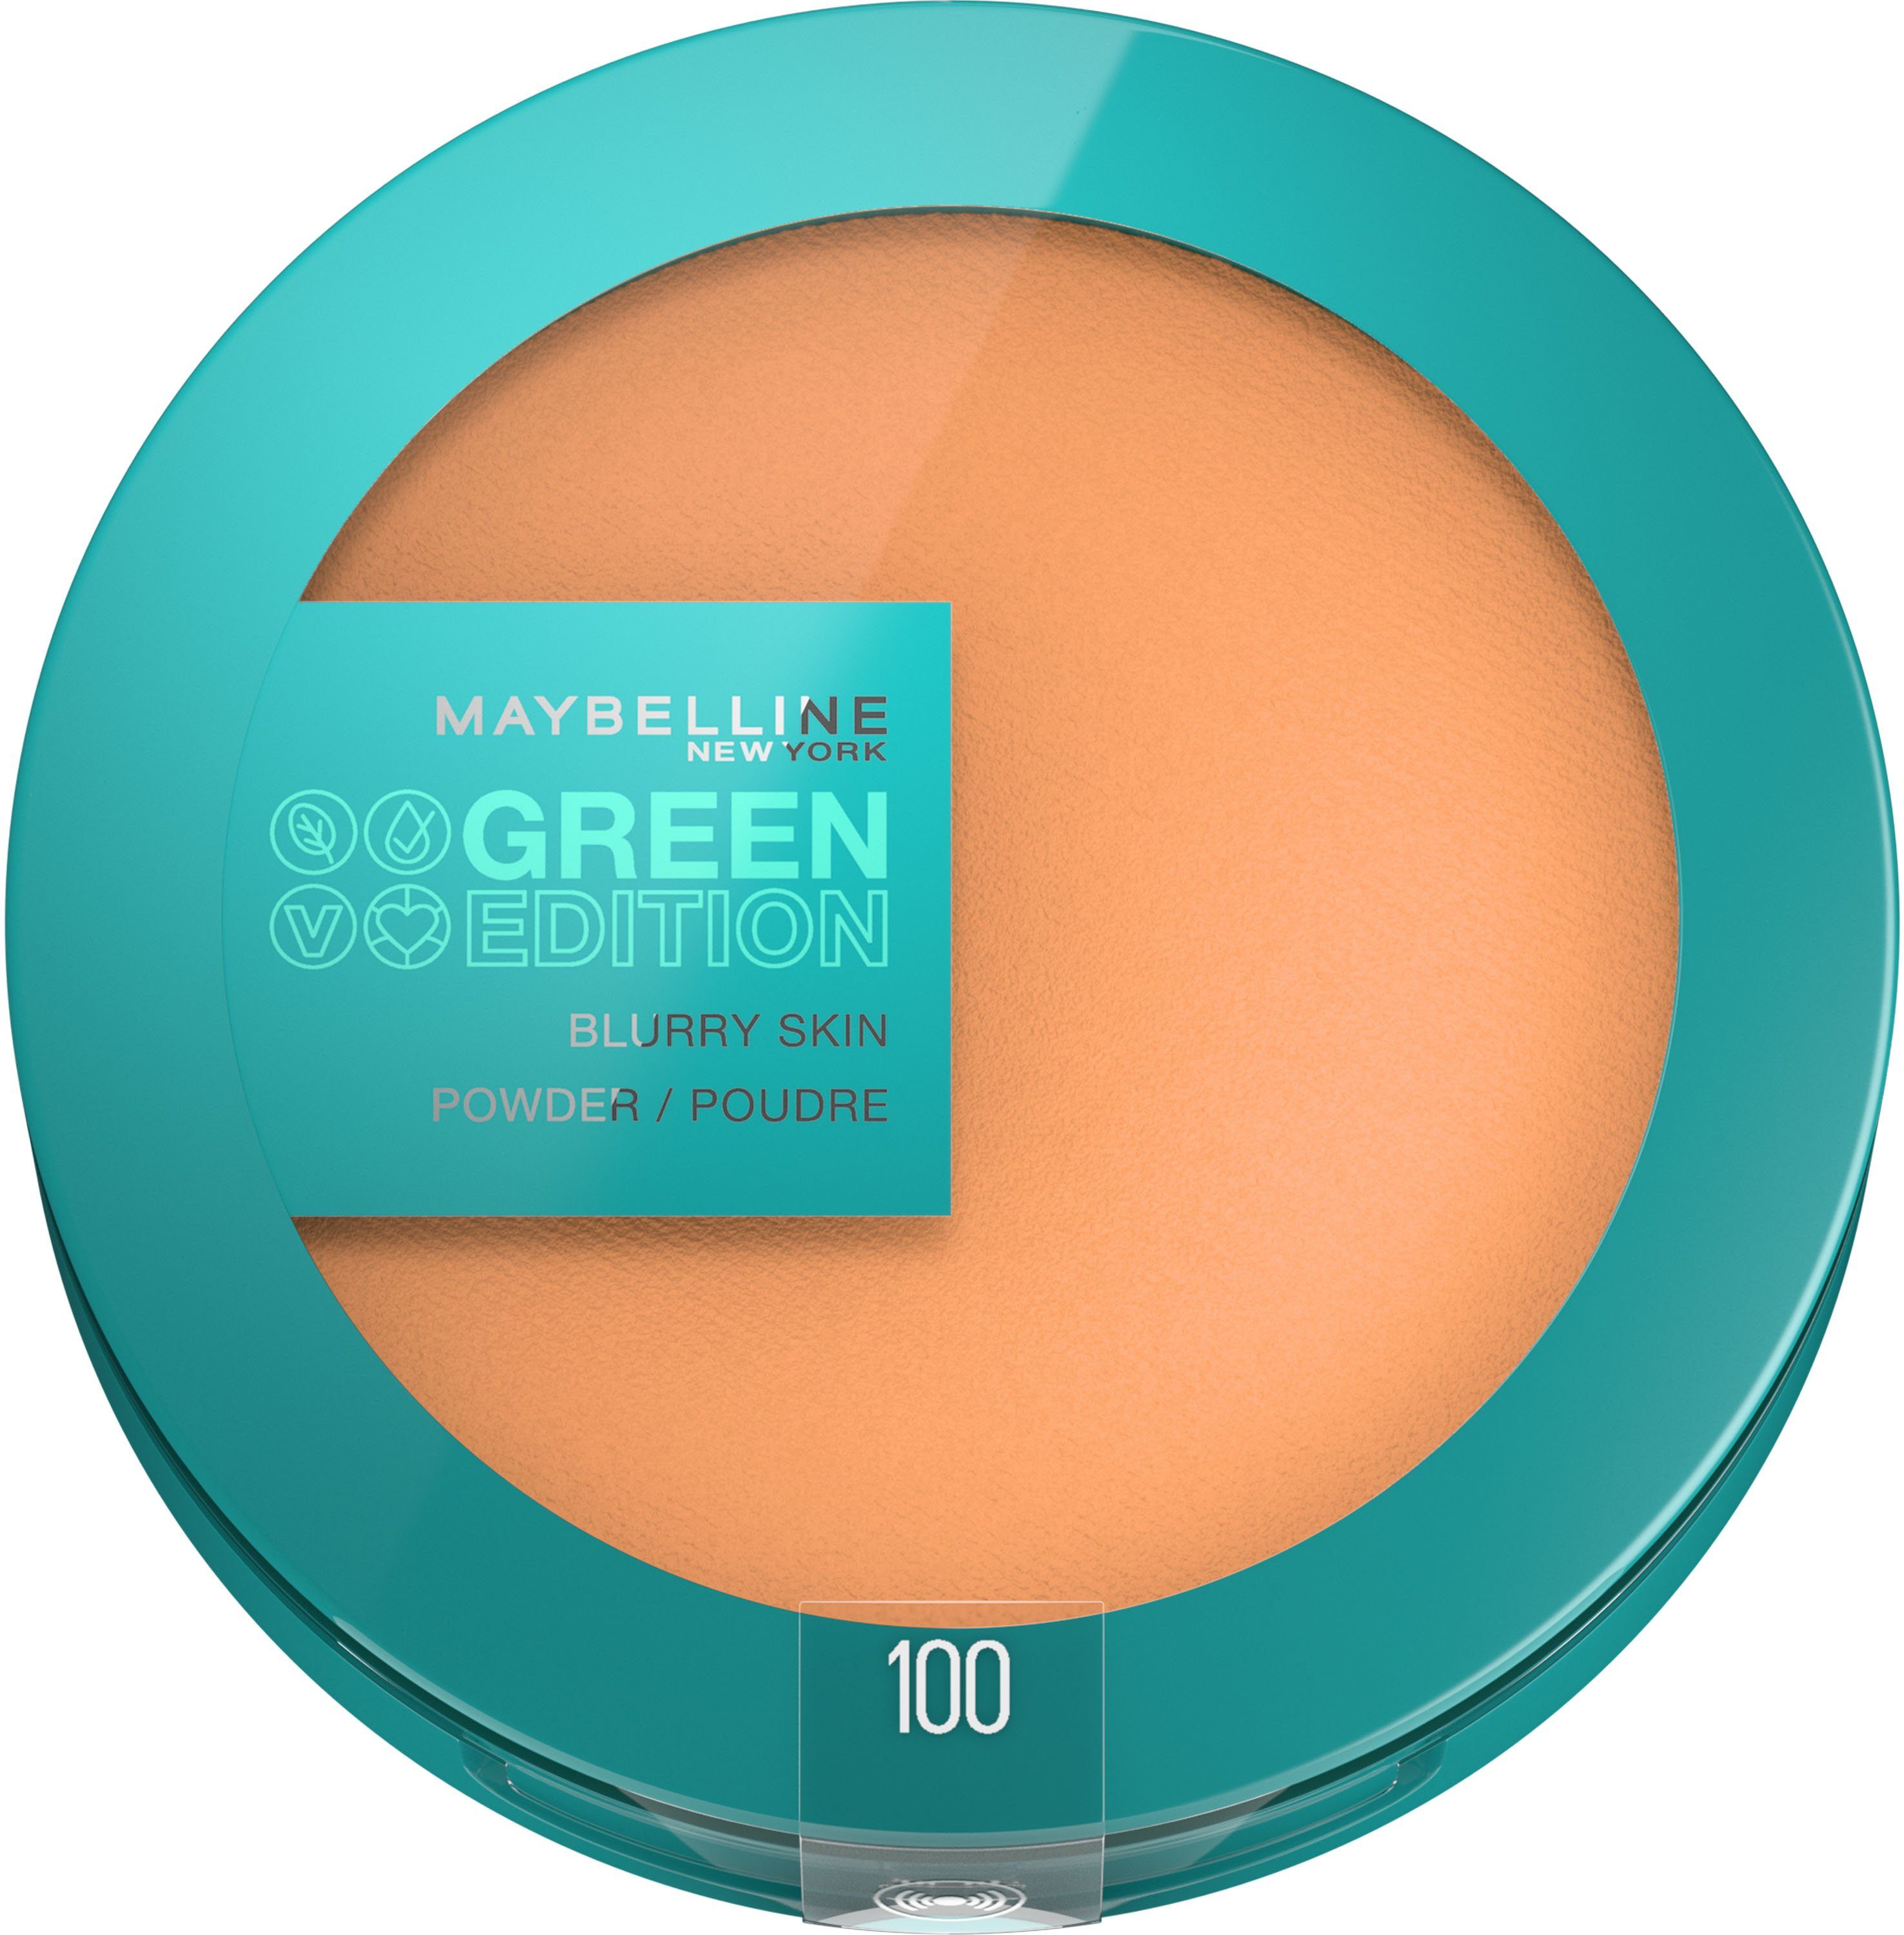 100 NEW Puder MAYBELLINE ED Green GREEN POWDER YORK Puder Edition